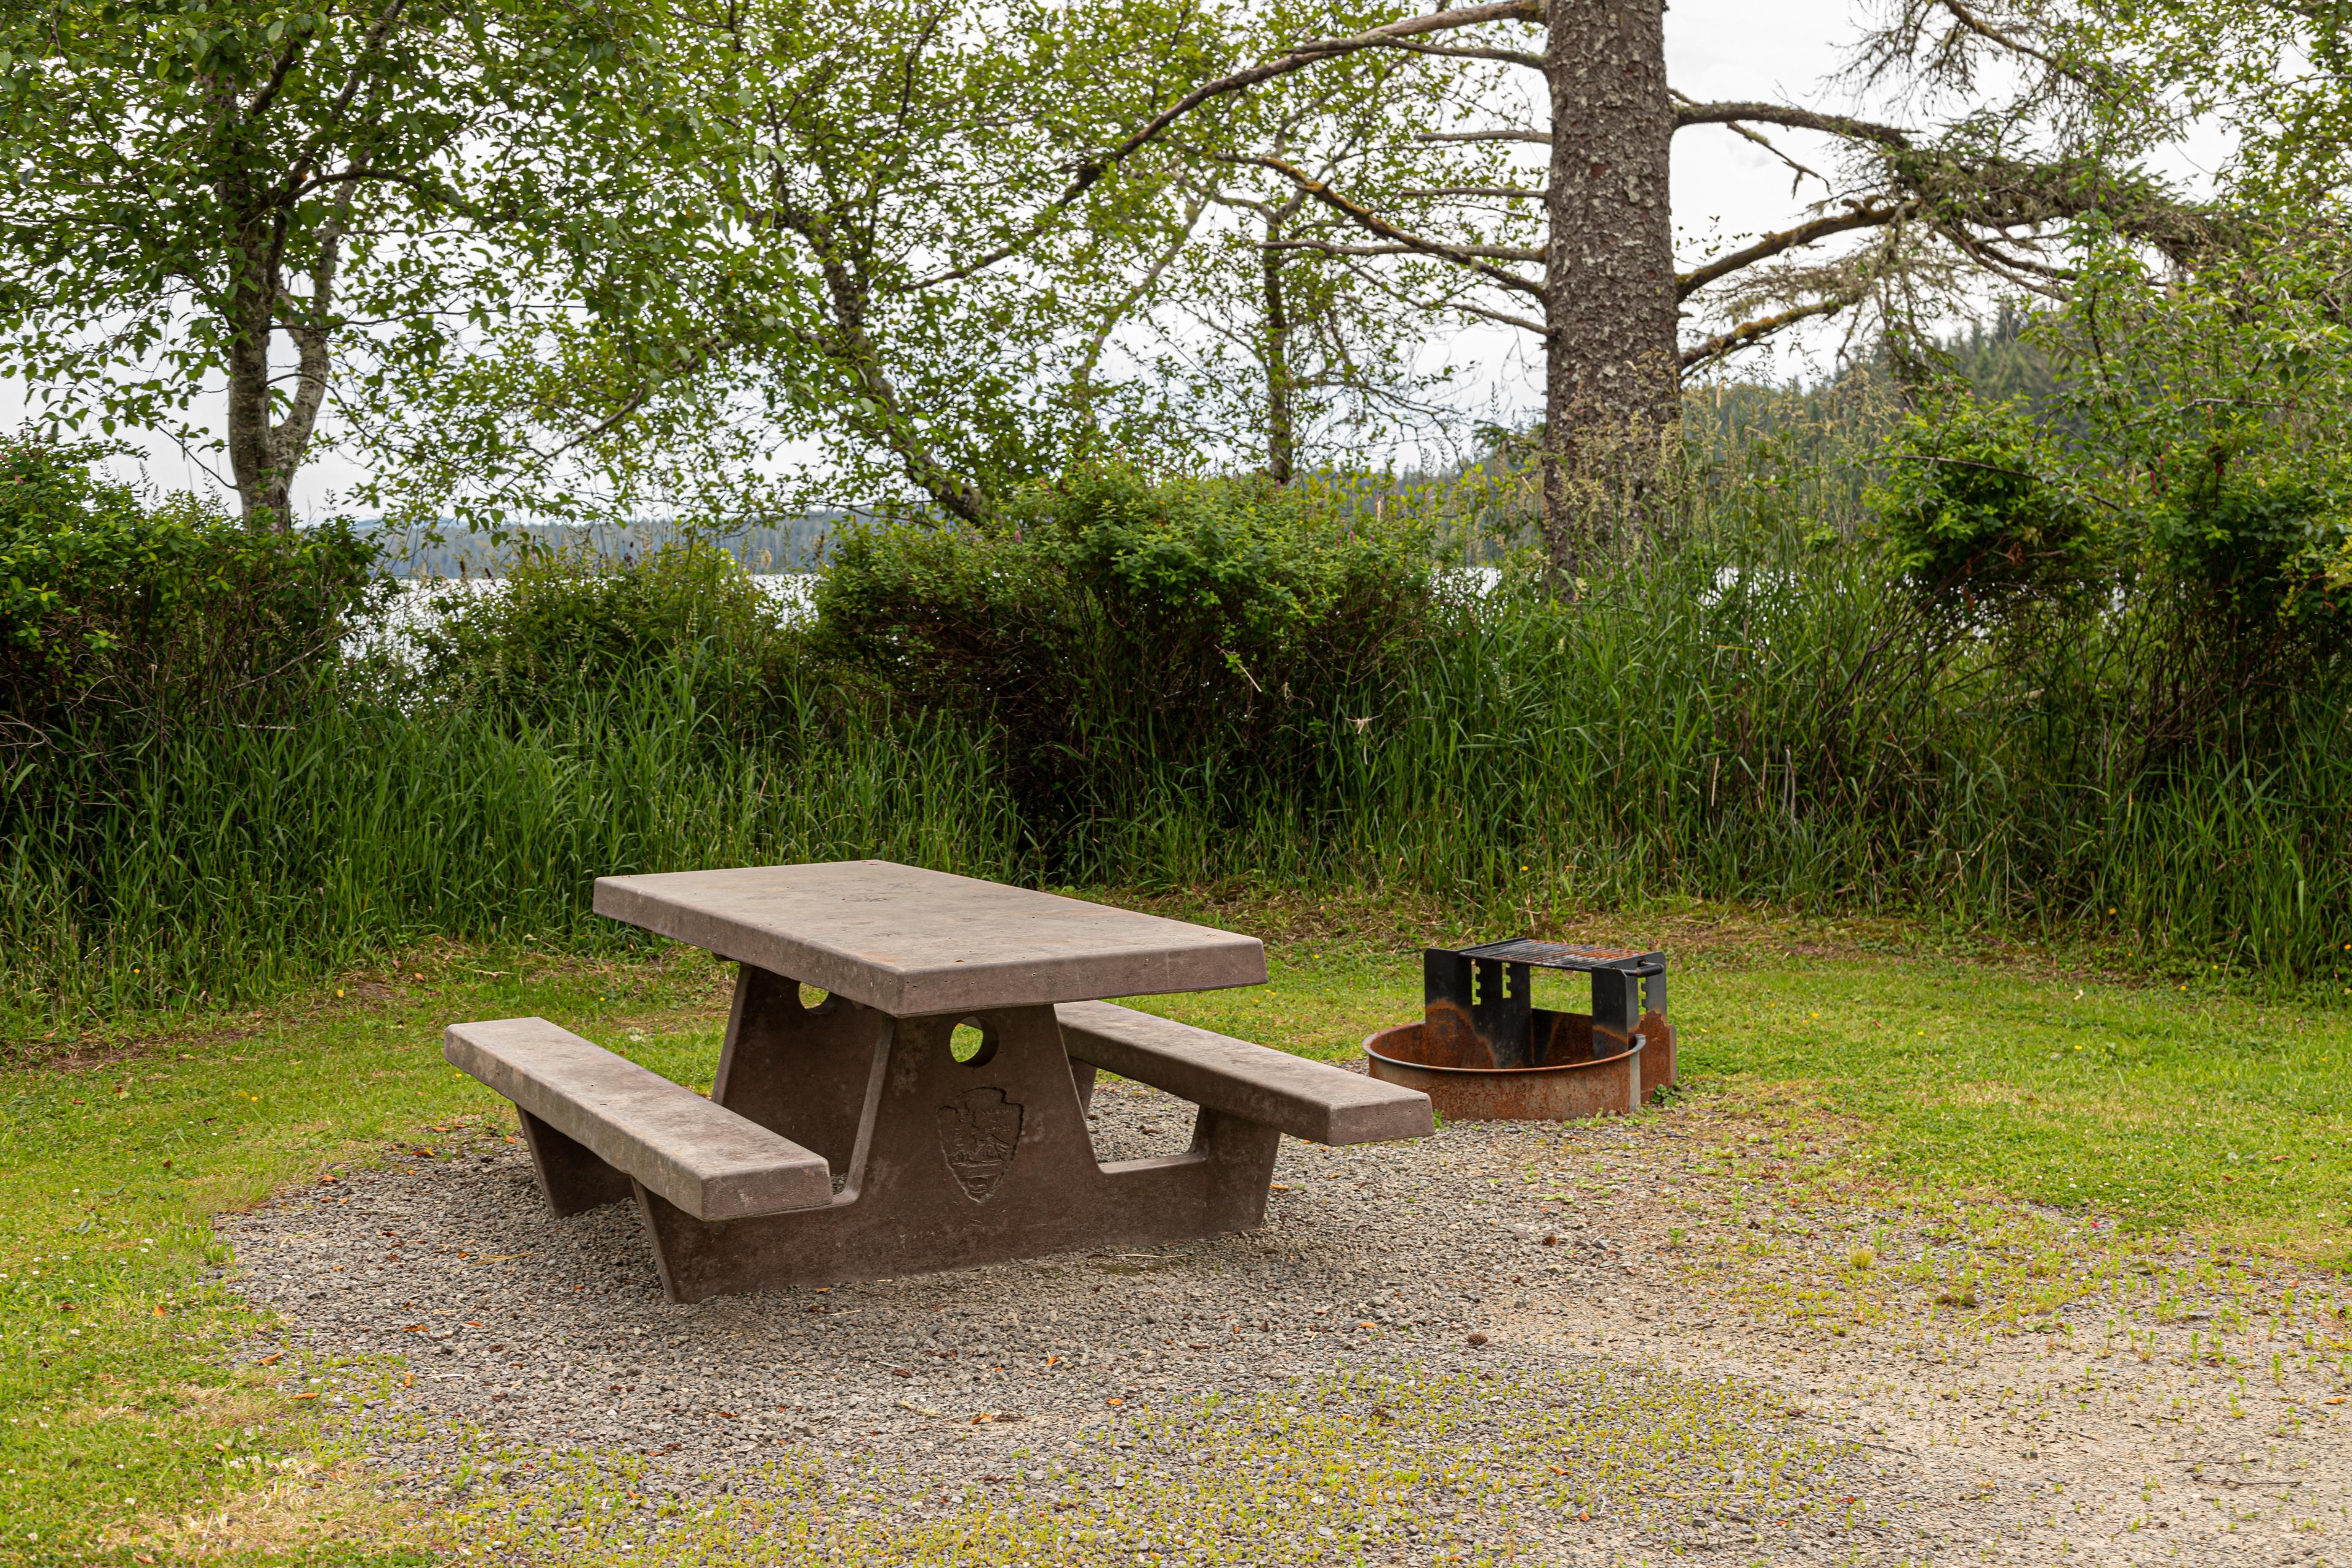 A grassy campsite with picnic table.